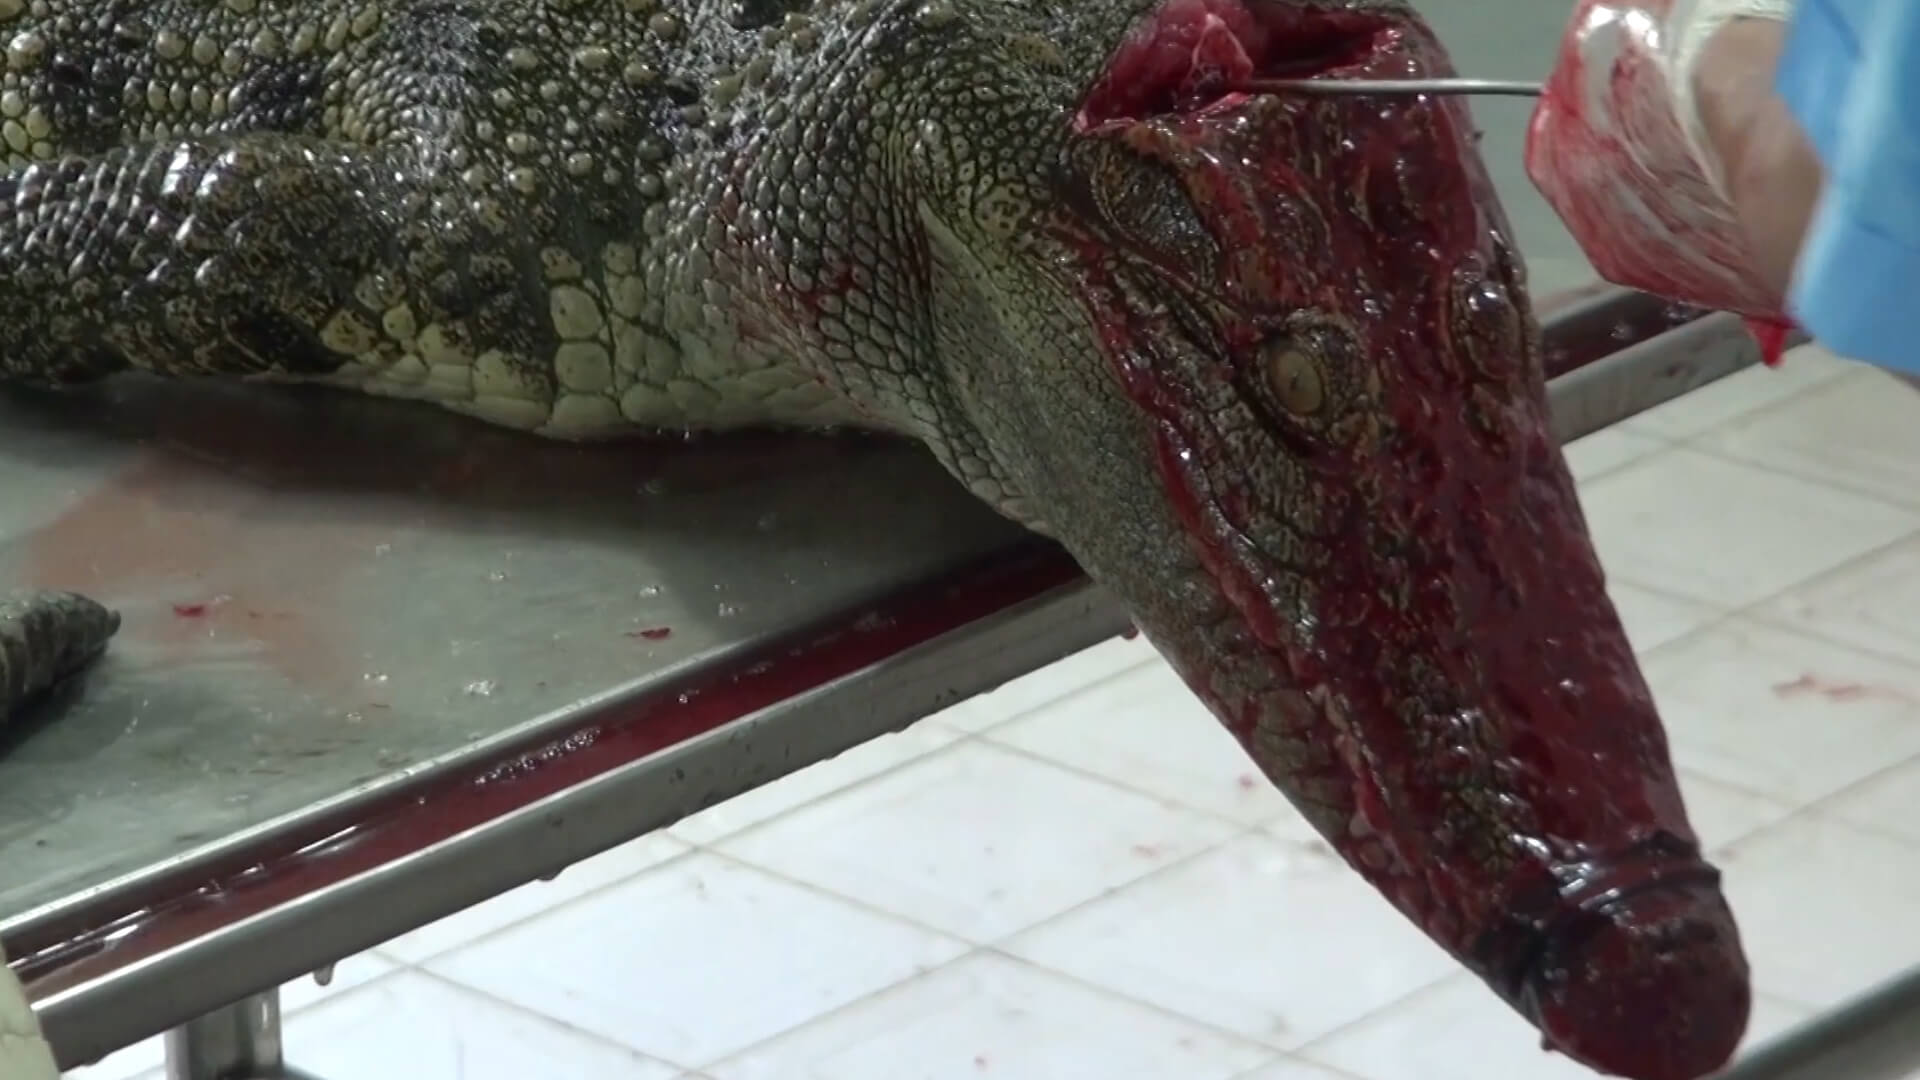 Crocodiles Cut Open, Skinned in Vietnam for Leather Bags - Living